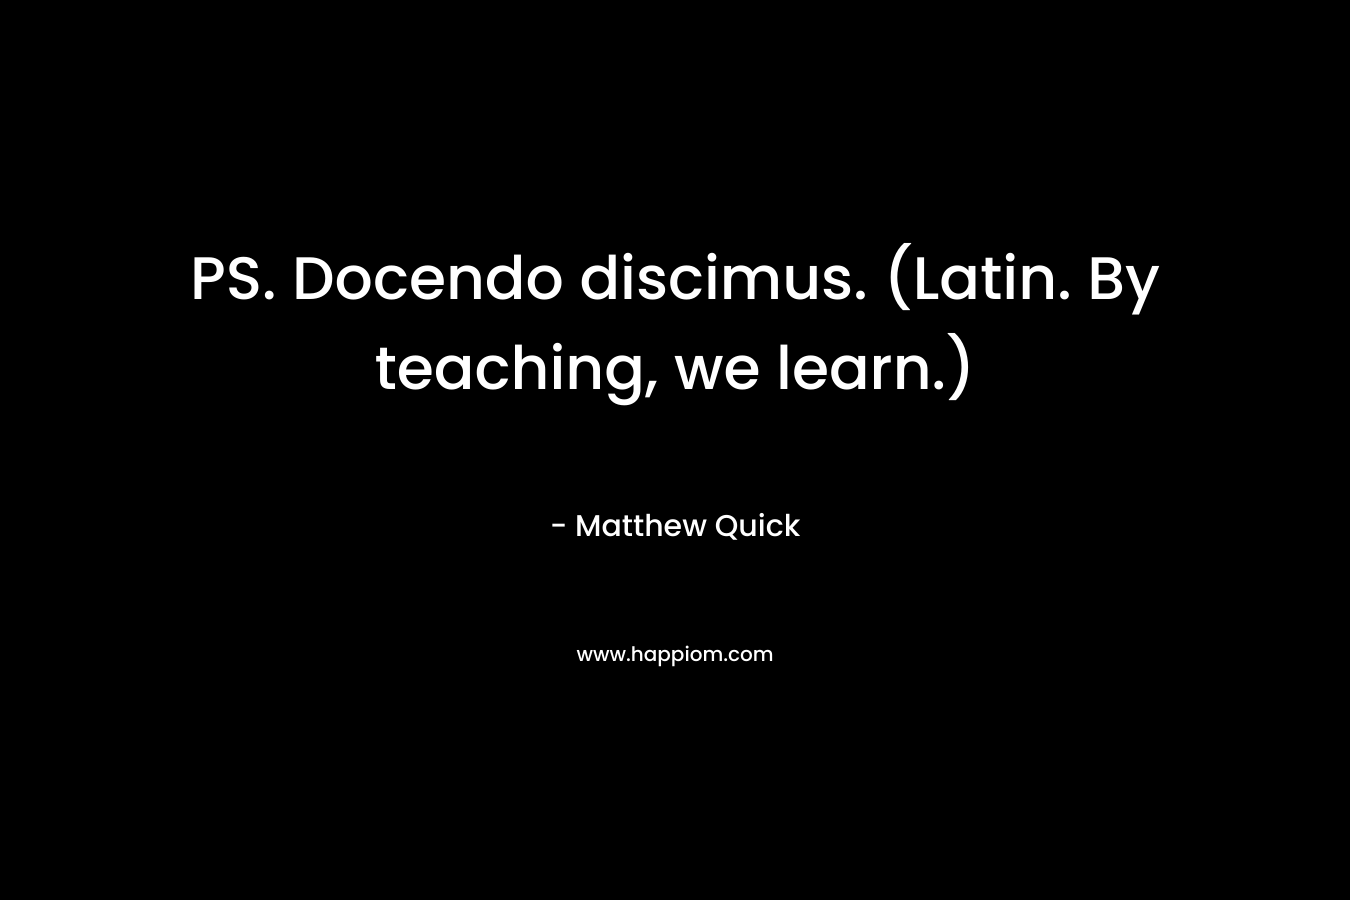 PS. Docendo discimus. (Latin. By teaching, we learn.) – Matthew Quick